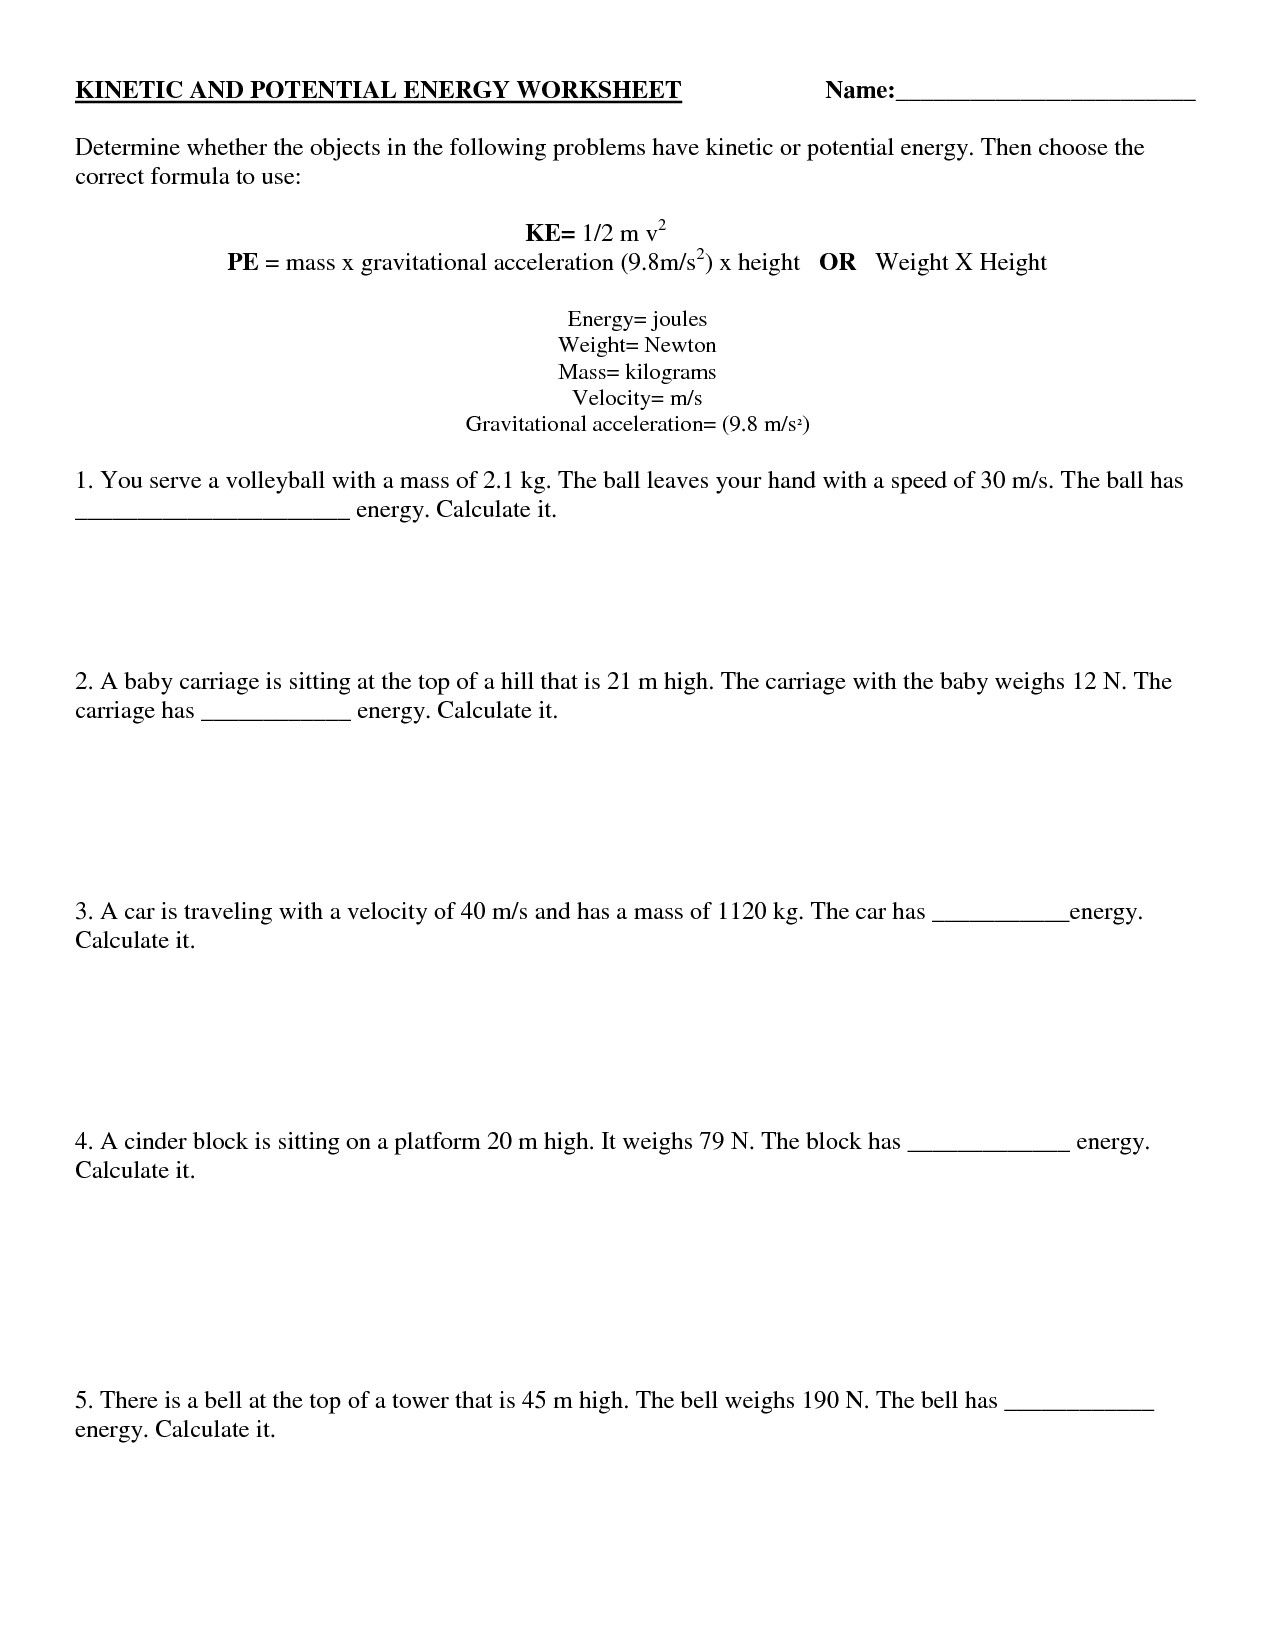 Kinetic and potential energy worksheet answers 17 best images of 14 worksheets energy